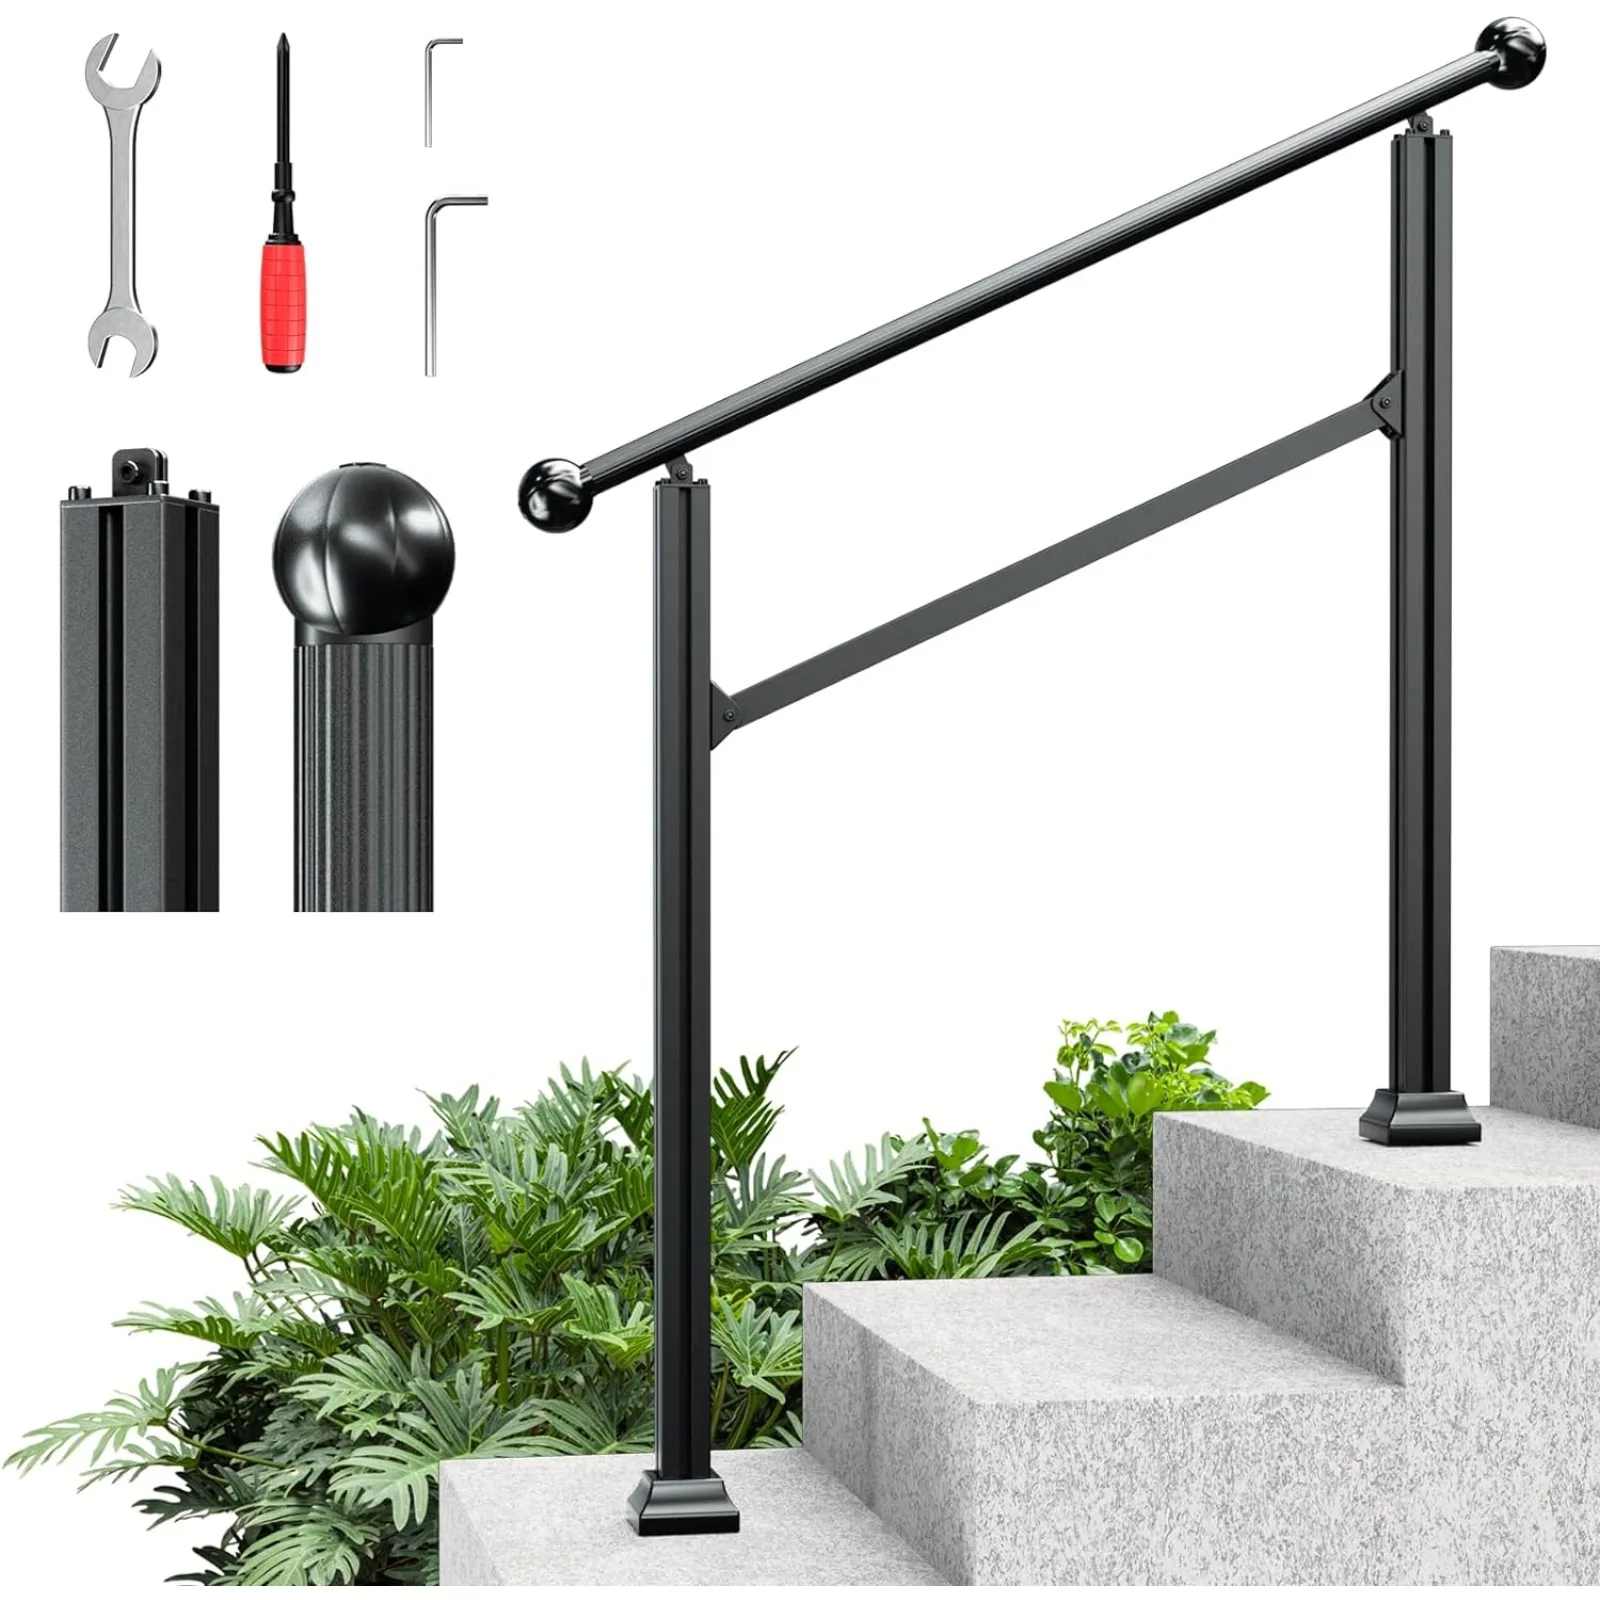 

US Heavy Duty 3 Steps Handrails for Outdoor Steps - Adjtable Height Outdoor Stair Railing Fits 2